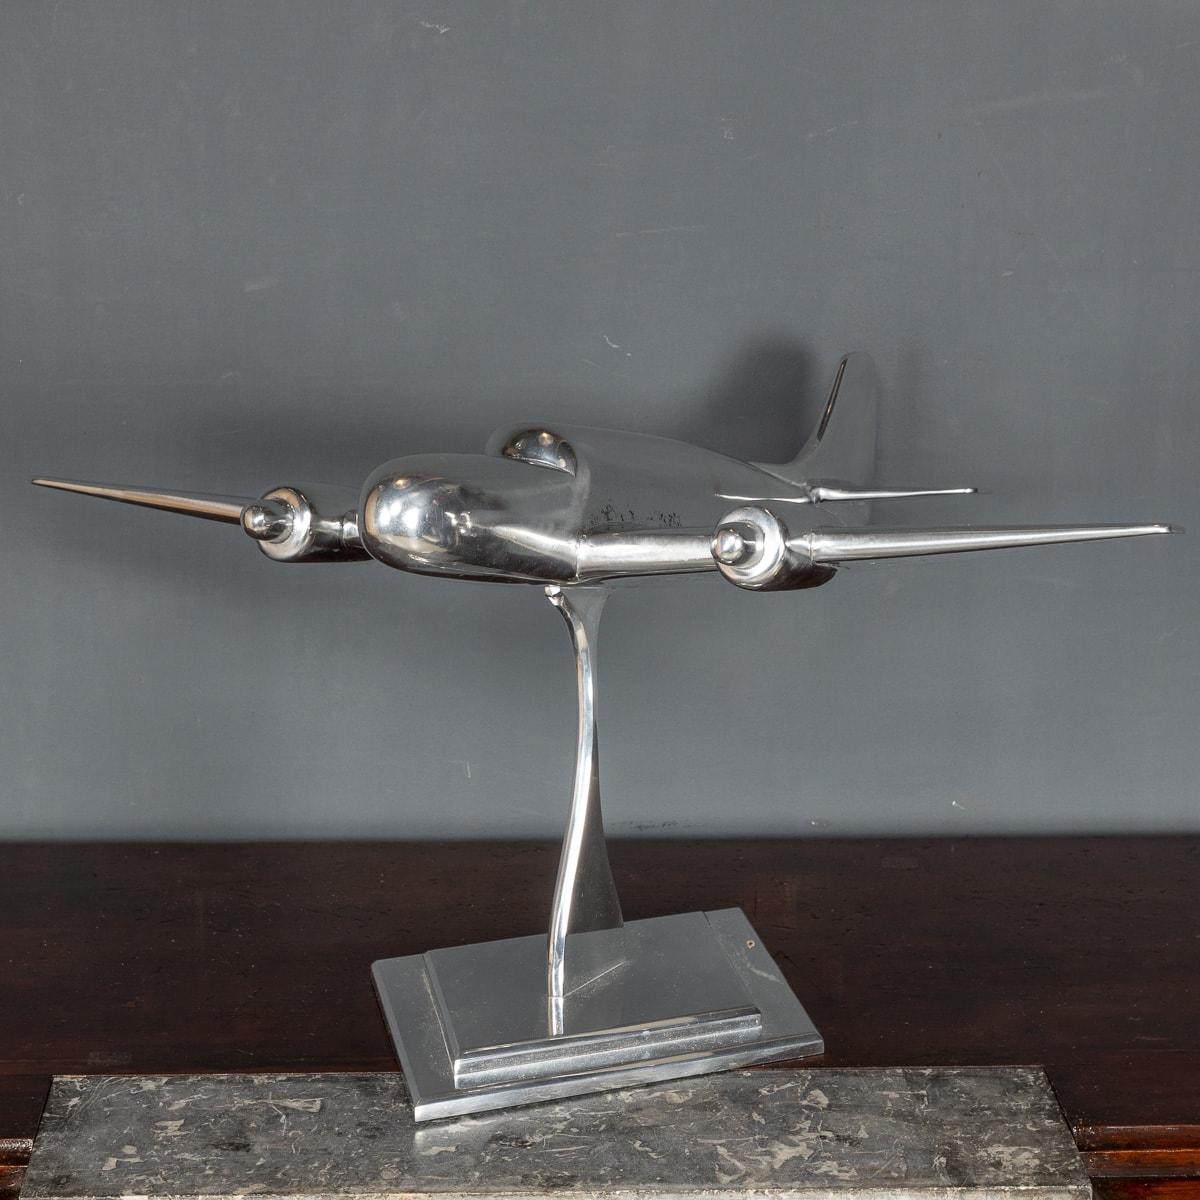 A Stunning mid-20th century model of an bomber airplane, made of polished aluminum, standing on an elegant art deco style stand.

CONDITION
In Great condition - No damage, just general wear.

SIZE
Height: 39cm
Width: 77cm
Depth: 60cm